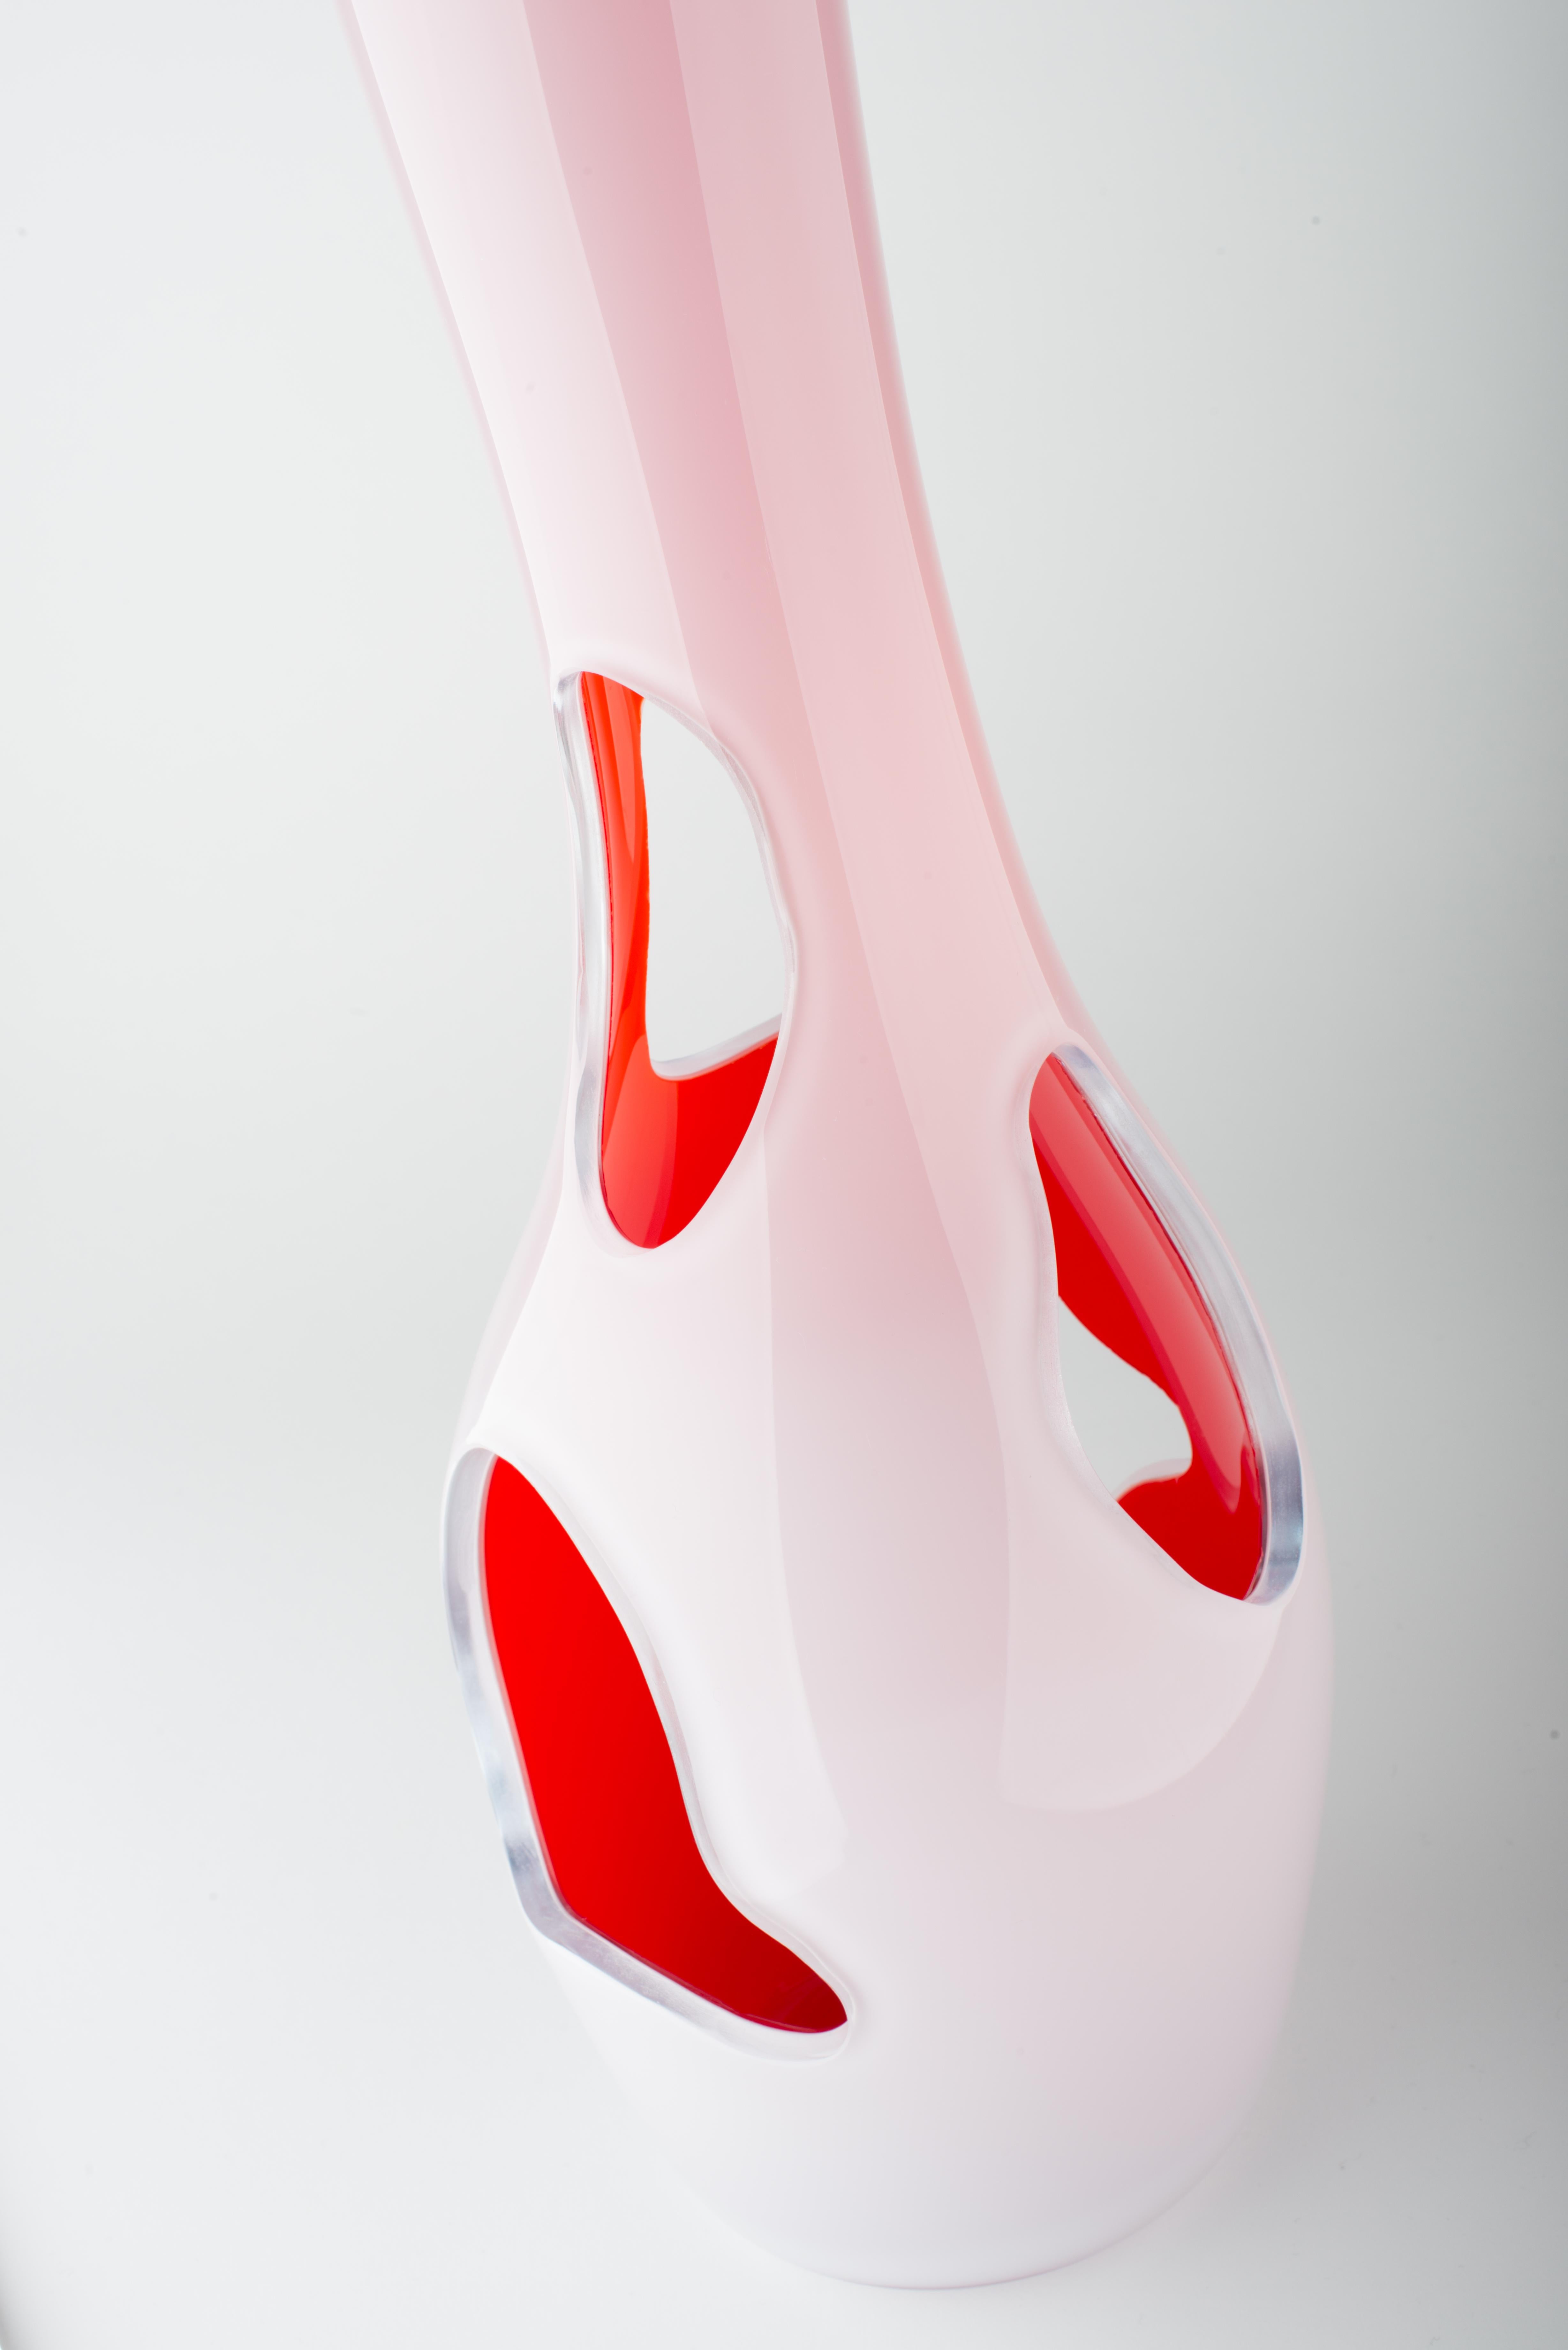 Hand-Woven Murano Glass Sculpture, NOT A VASE by Reda Amalou, 2015, Gallery Collection For Sale